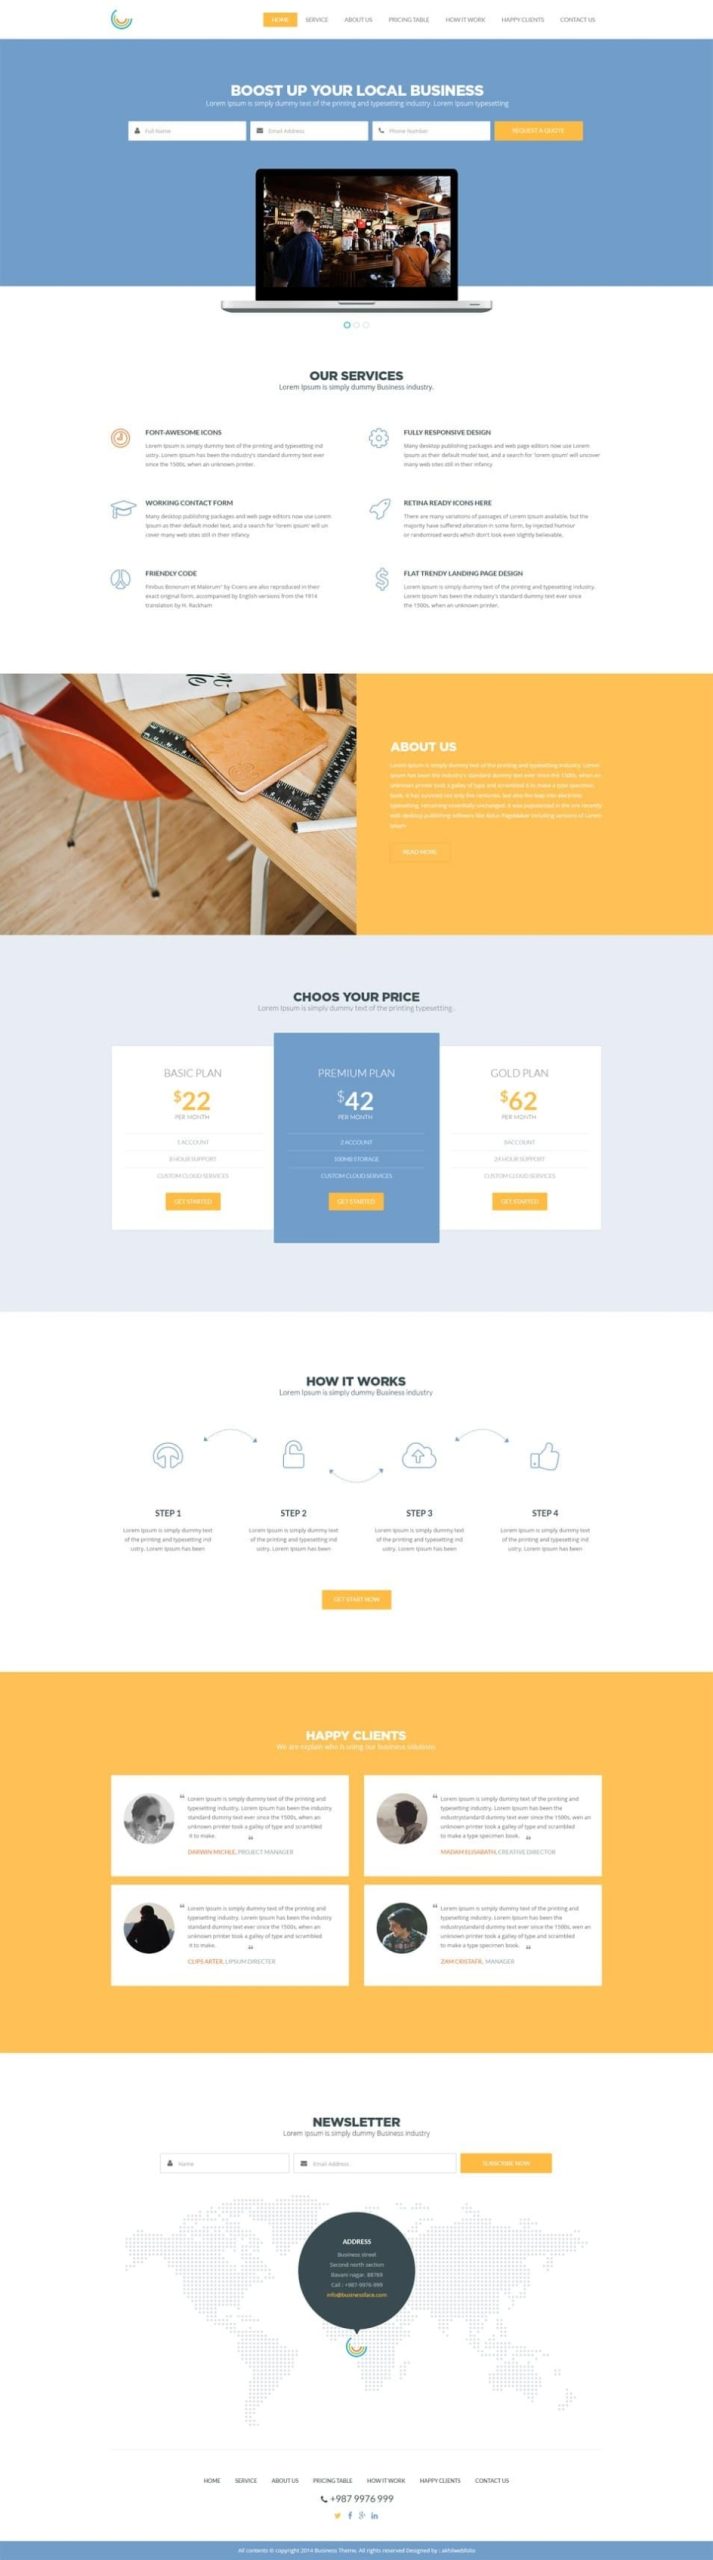 Free Corporate And Business Web Templates Psd Intended For Business Website Templates Psd Free Download